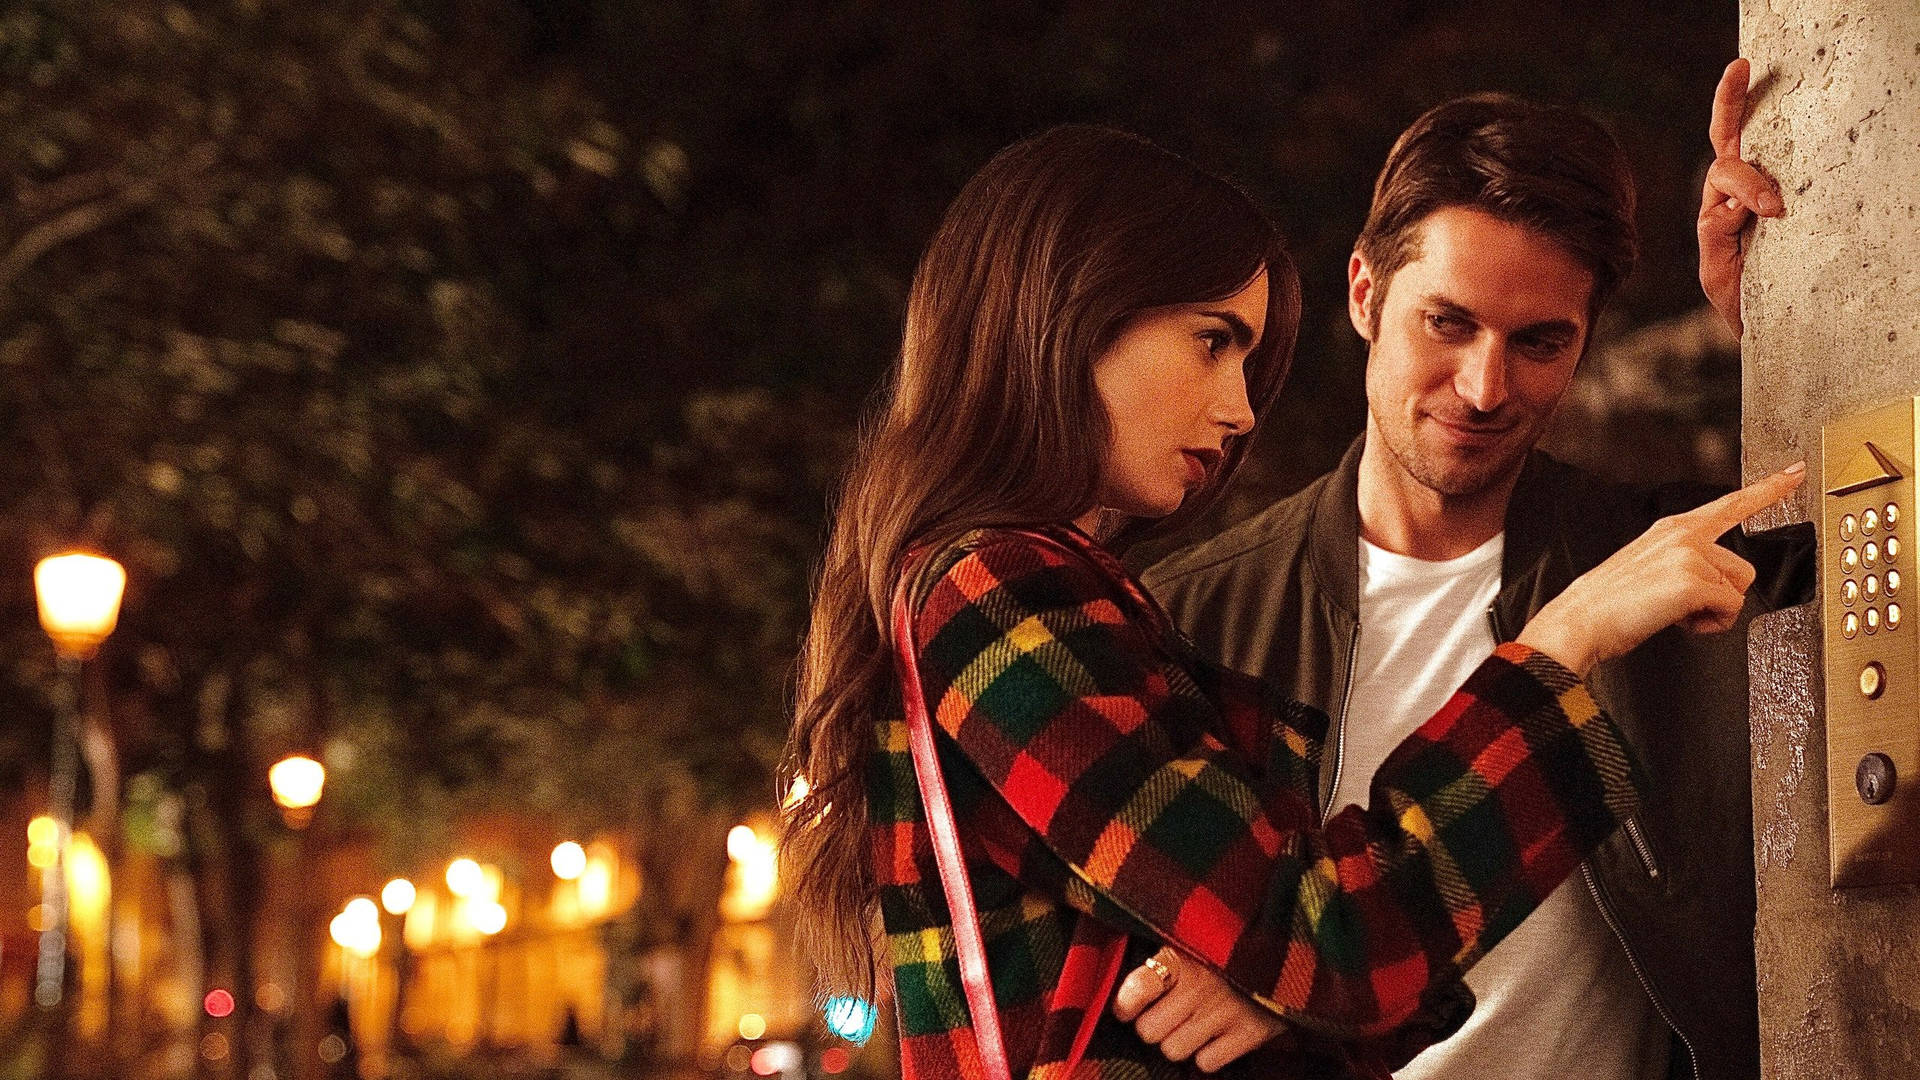 Emily, played by Lily Collins, and Gabriel, played by Lucas Bravo, enjoying a romantic moment in Paris. Wallpaper